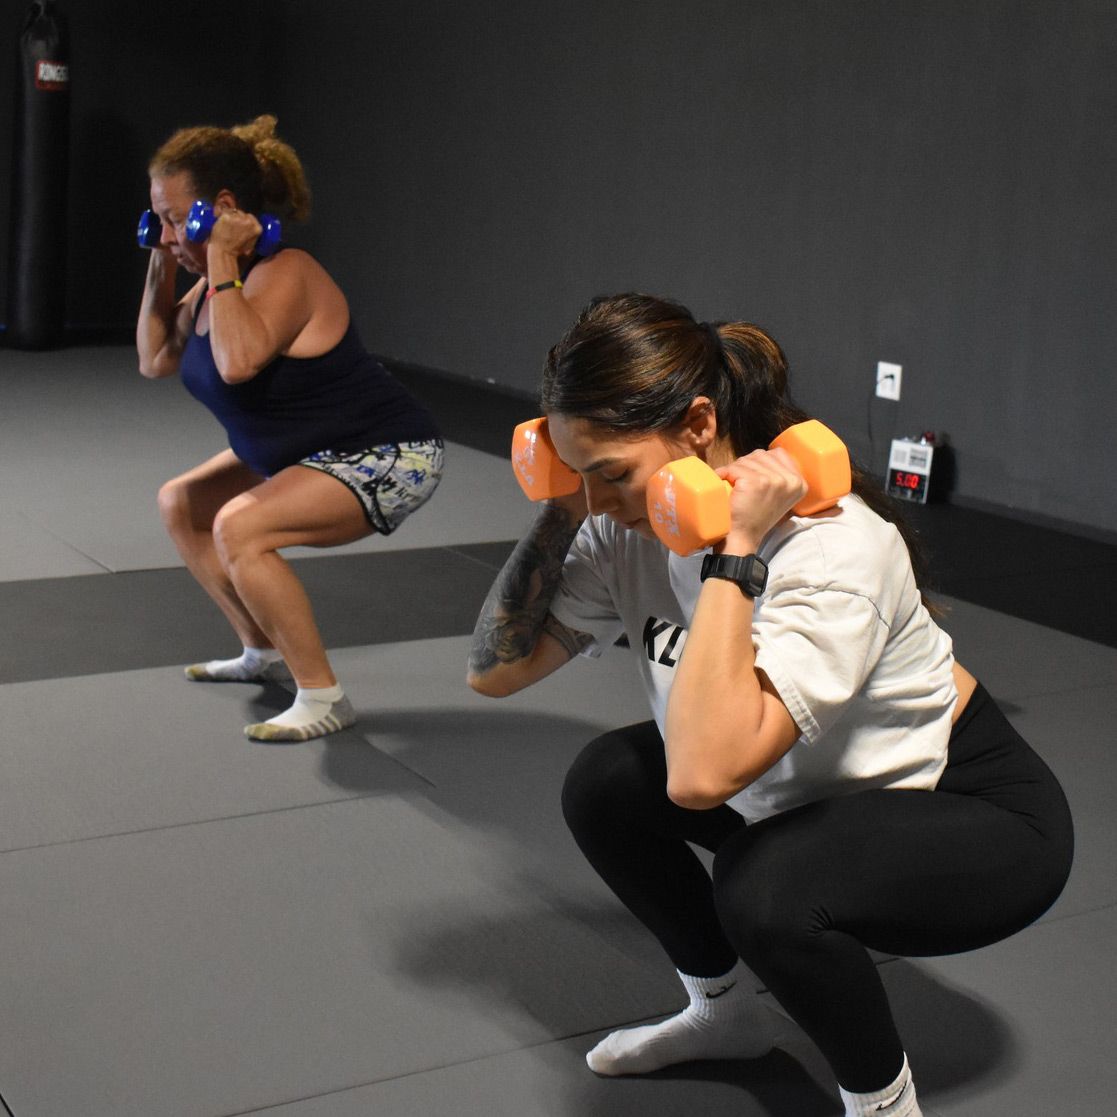 Two women squatting with dumbbells in their hands